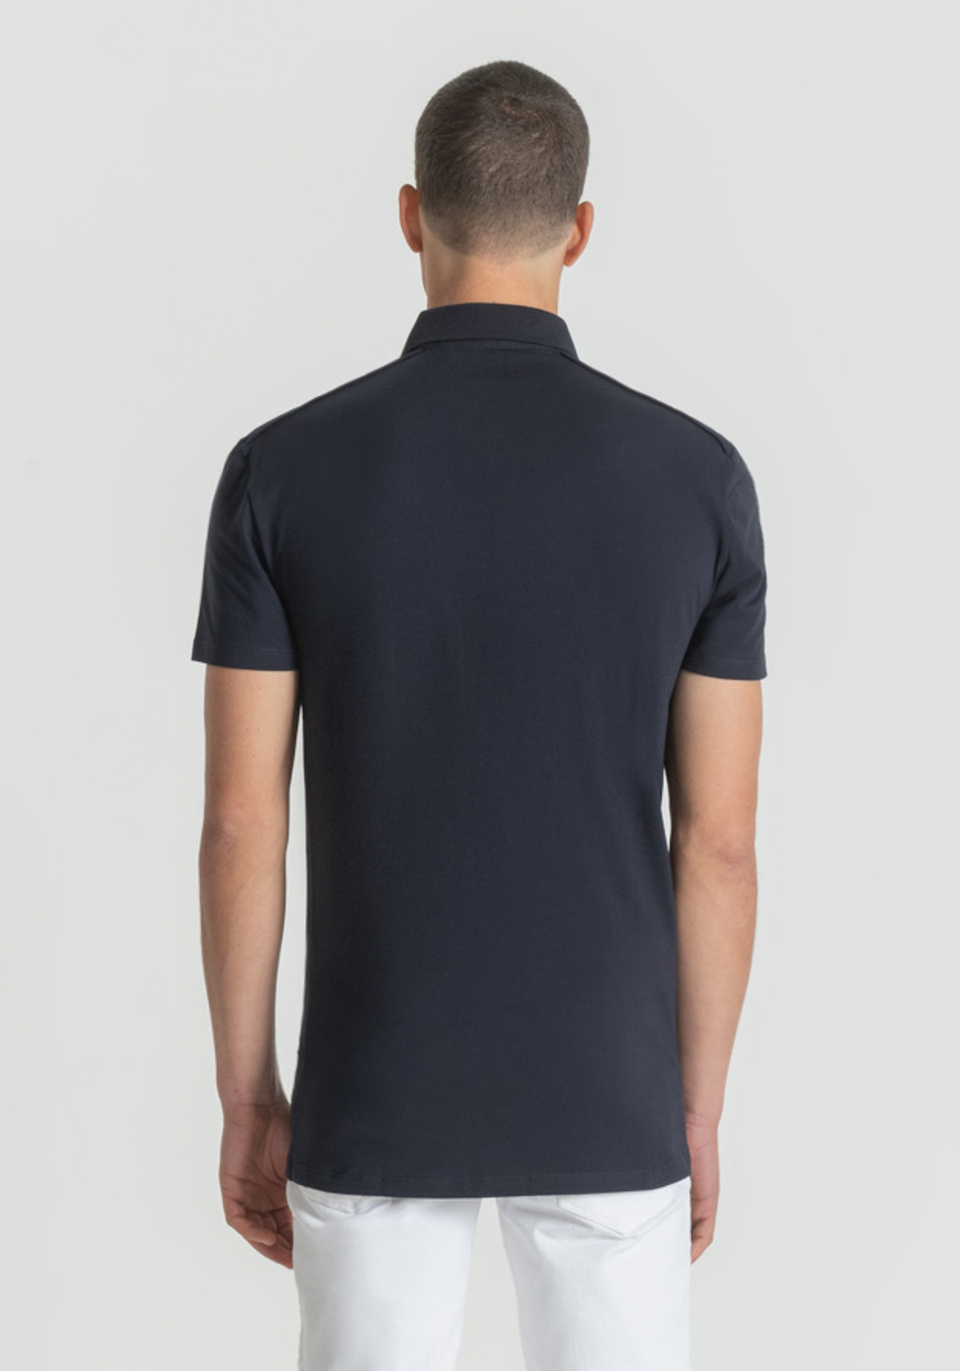 SUPER-SLIM-FIT POLO SHIRT IN SOFT STRETCHY COTTON - Antony Morato Online Shop